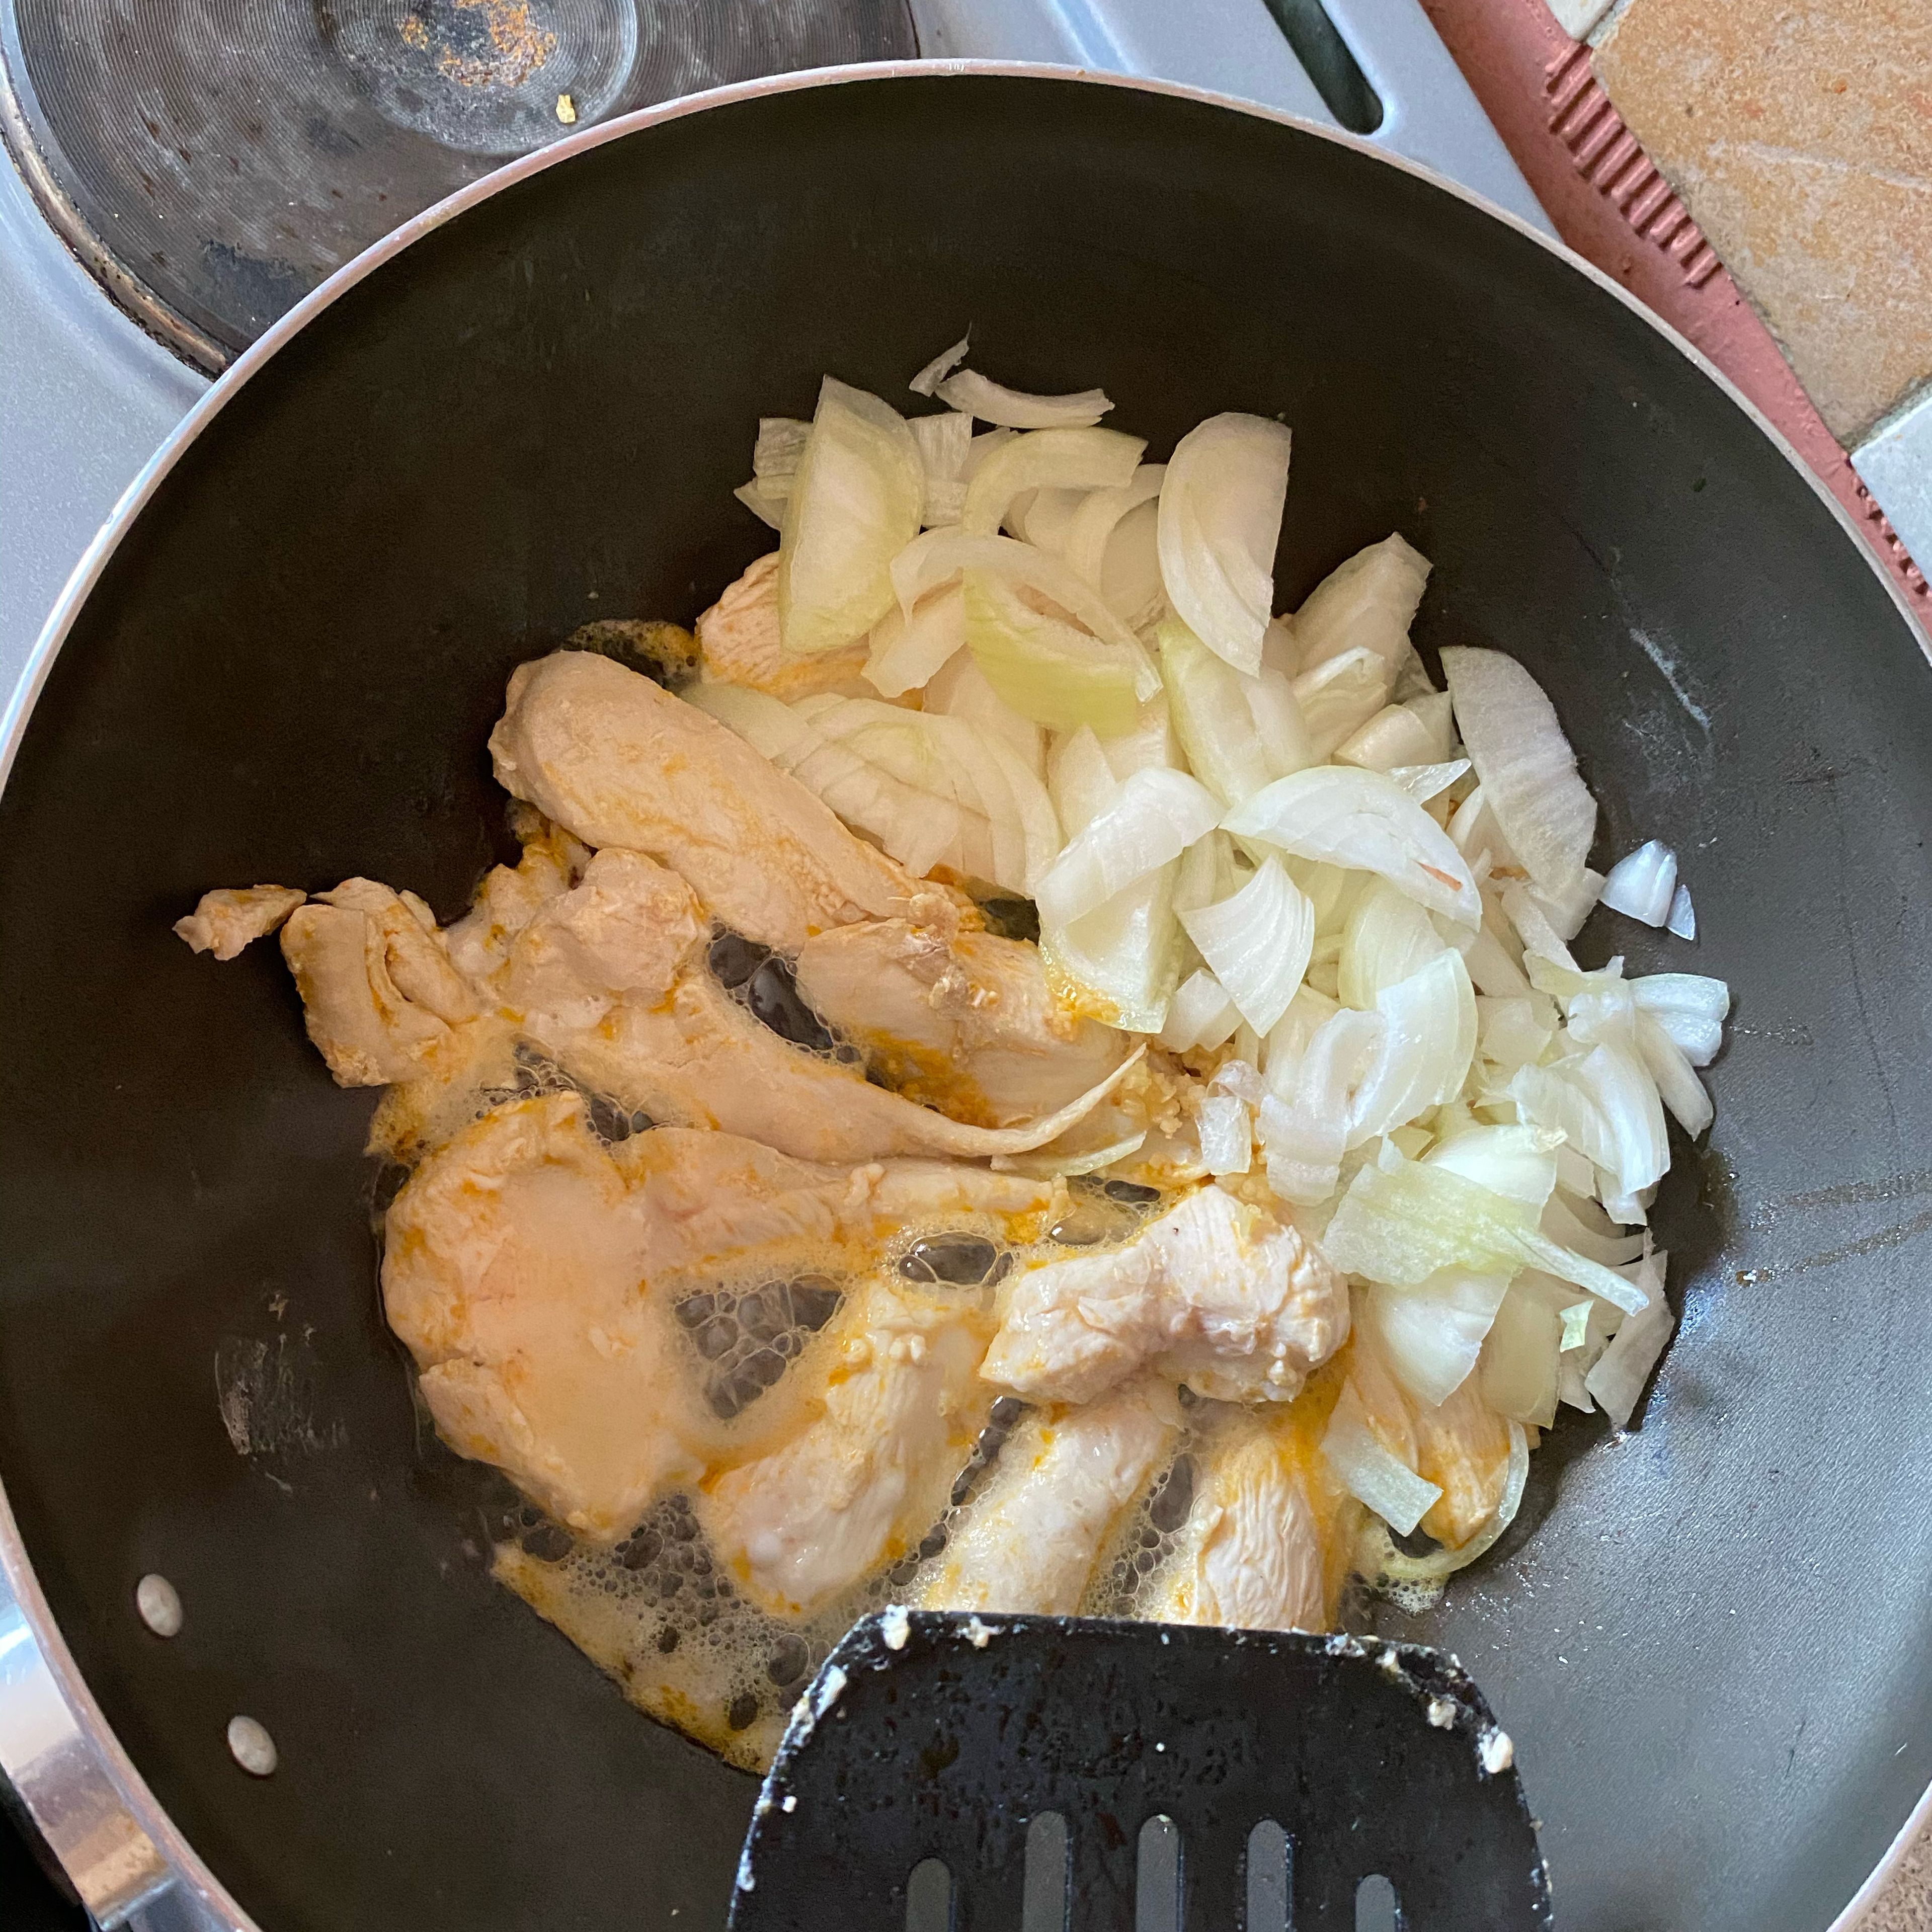 Slice the chicken into thin strips, lightly fry in olive oil. Then add the chopped onion to fry.